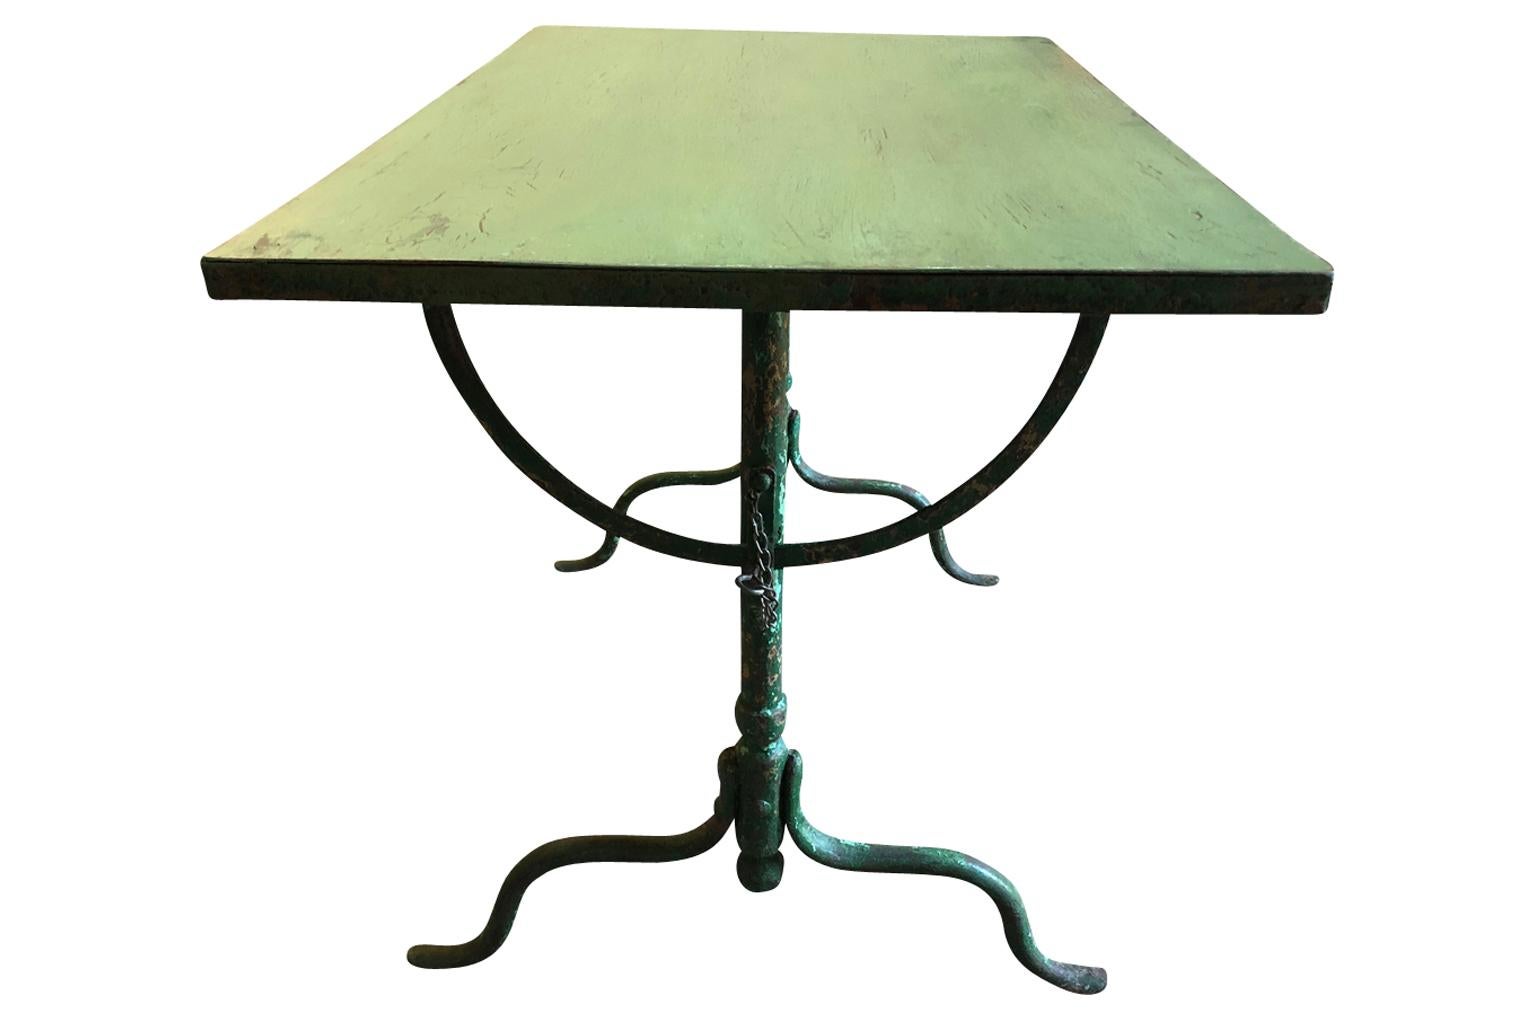 Painted French Garden Table, Dining Table